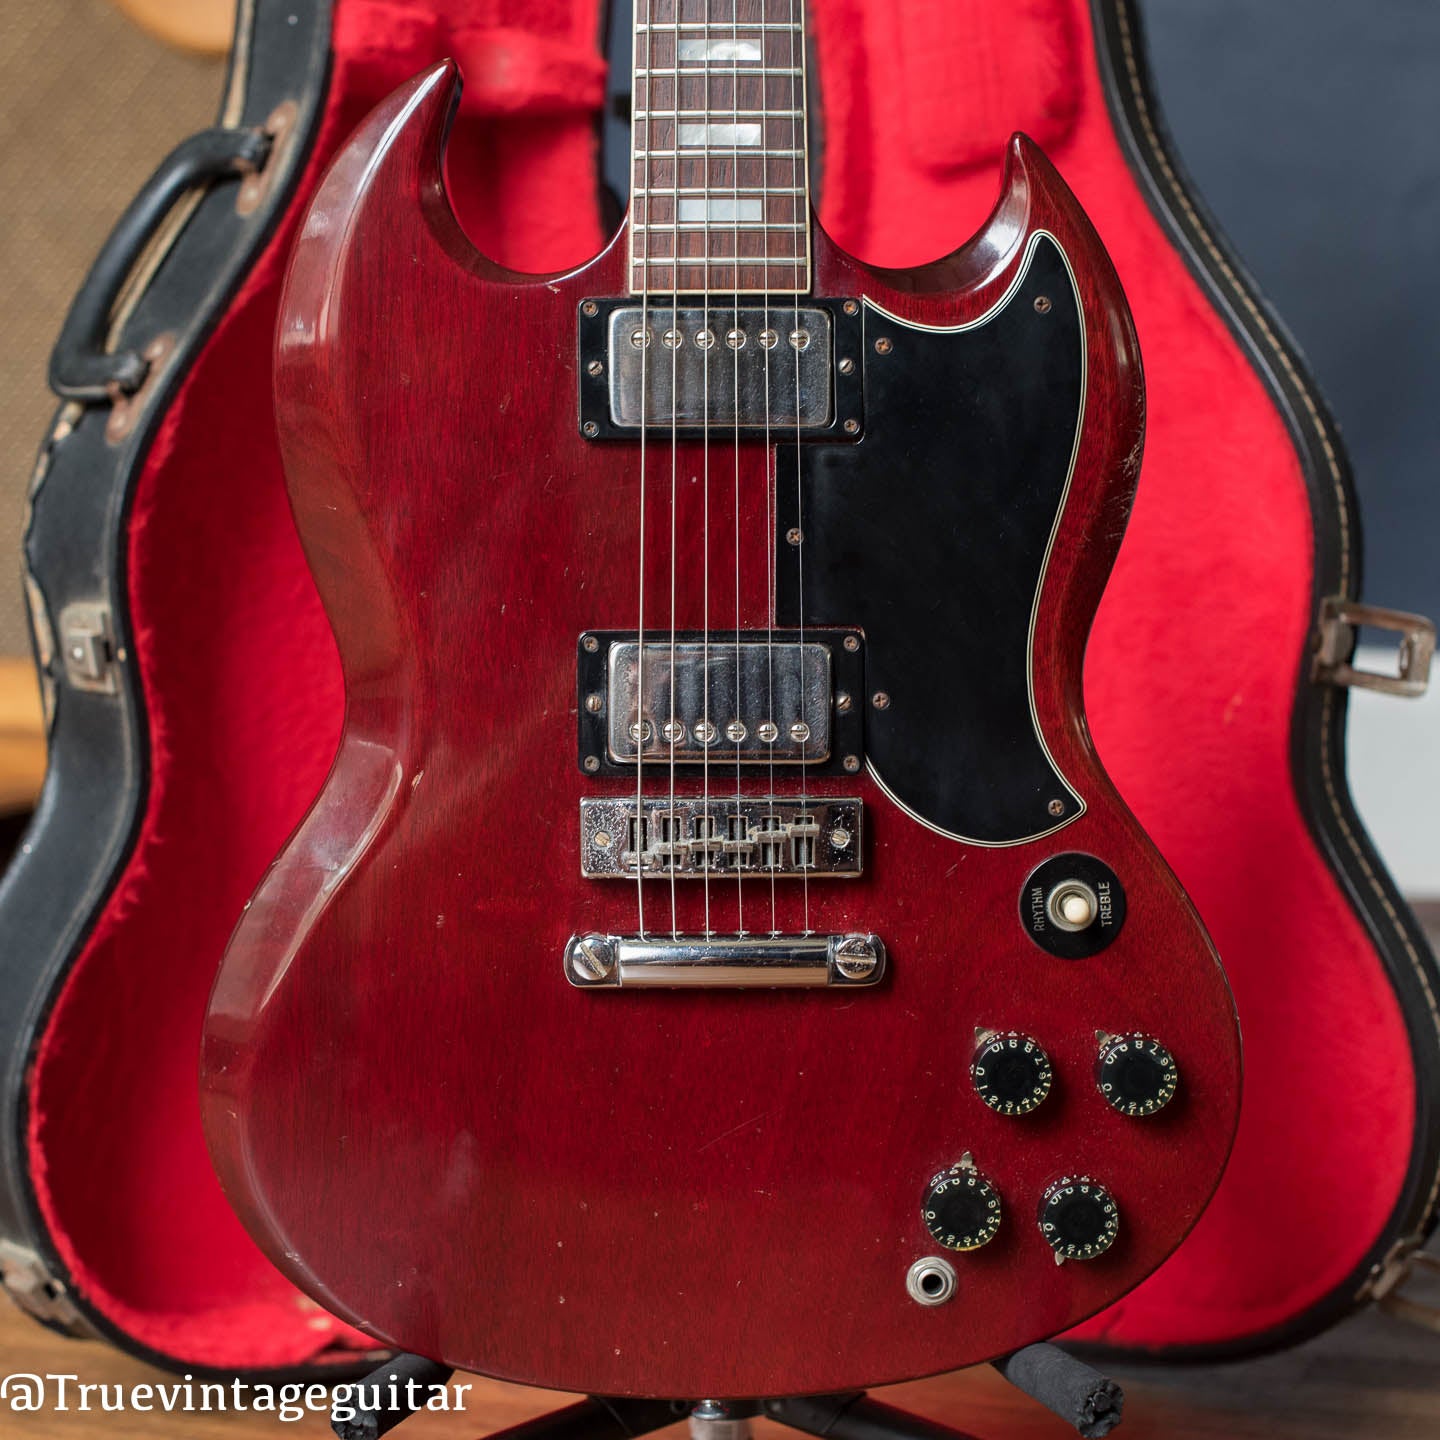 Gibson SG Standard electric guitar vintage 1970s Cherry Red